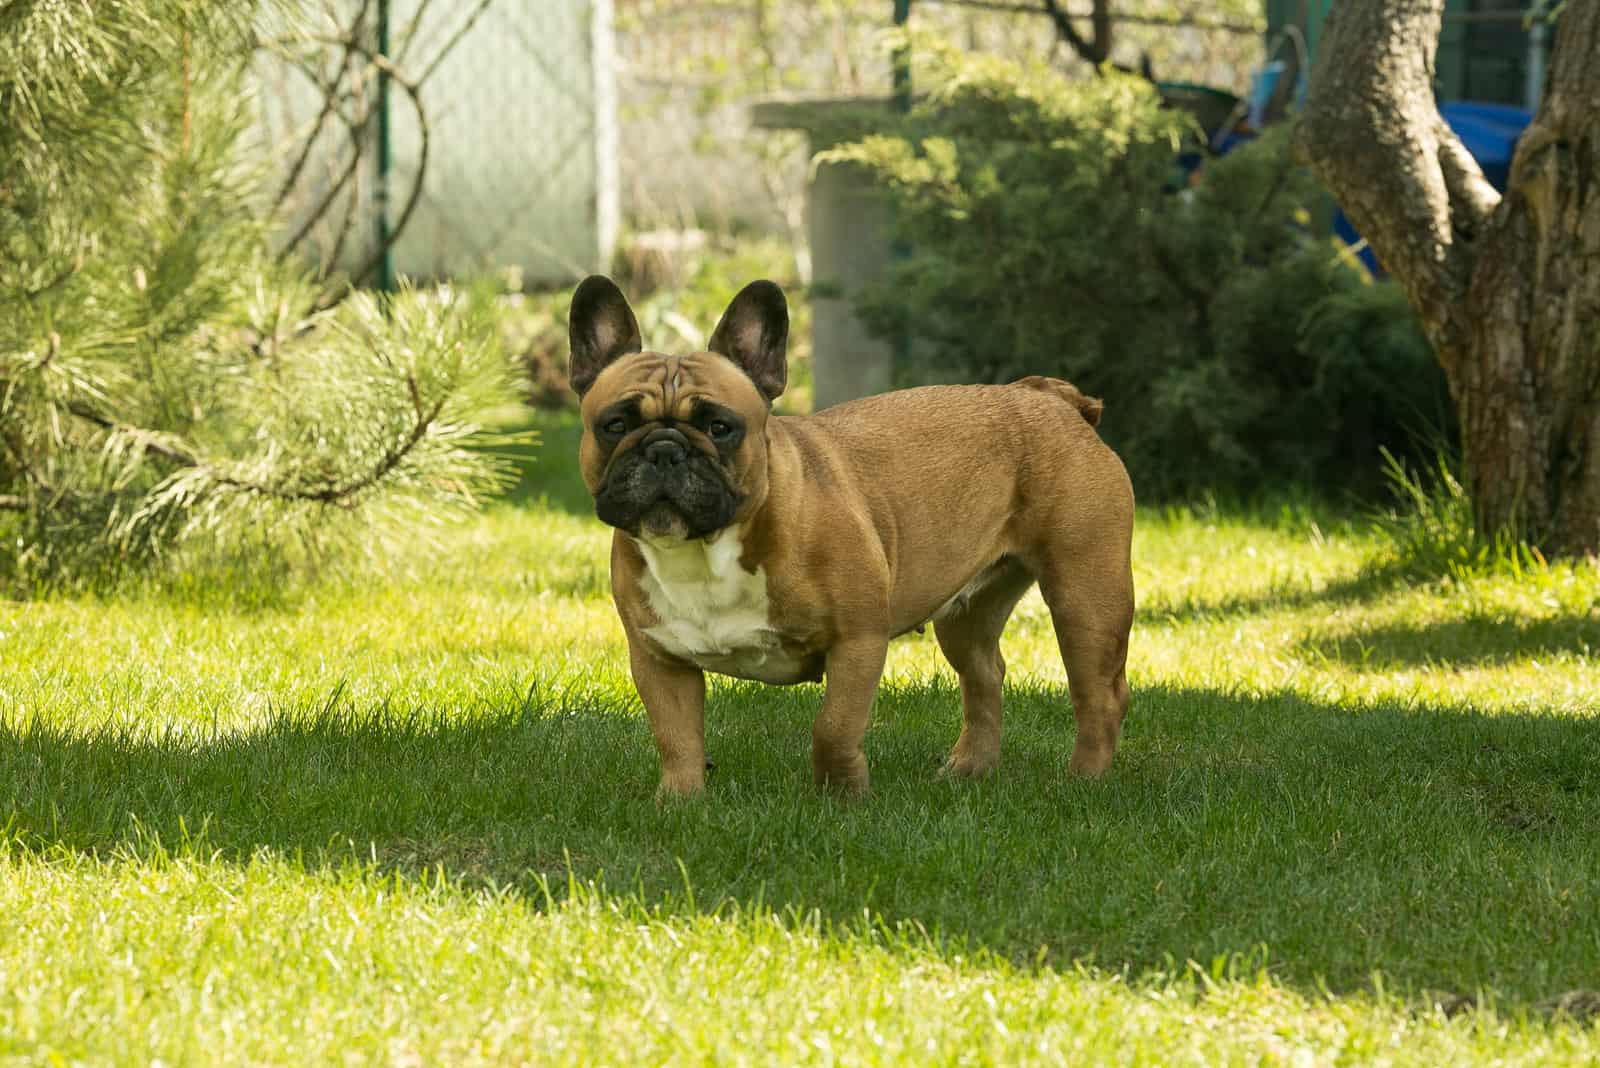 French Bull stands on the grass and looks ahead